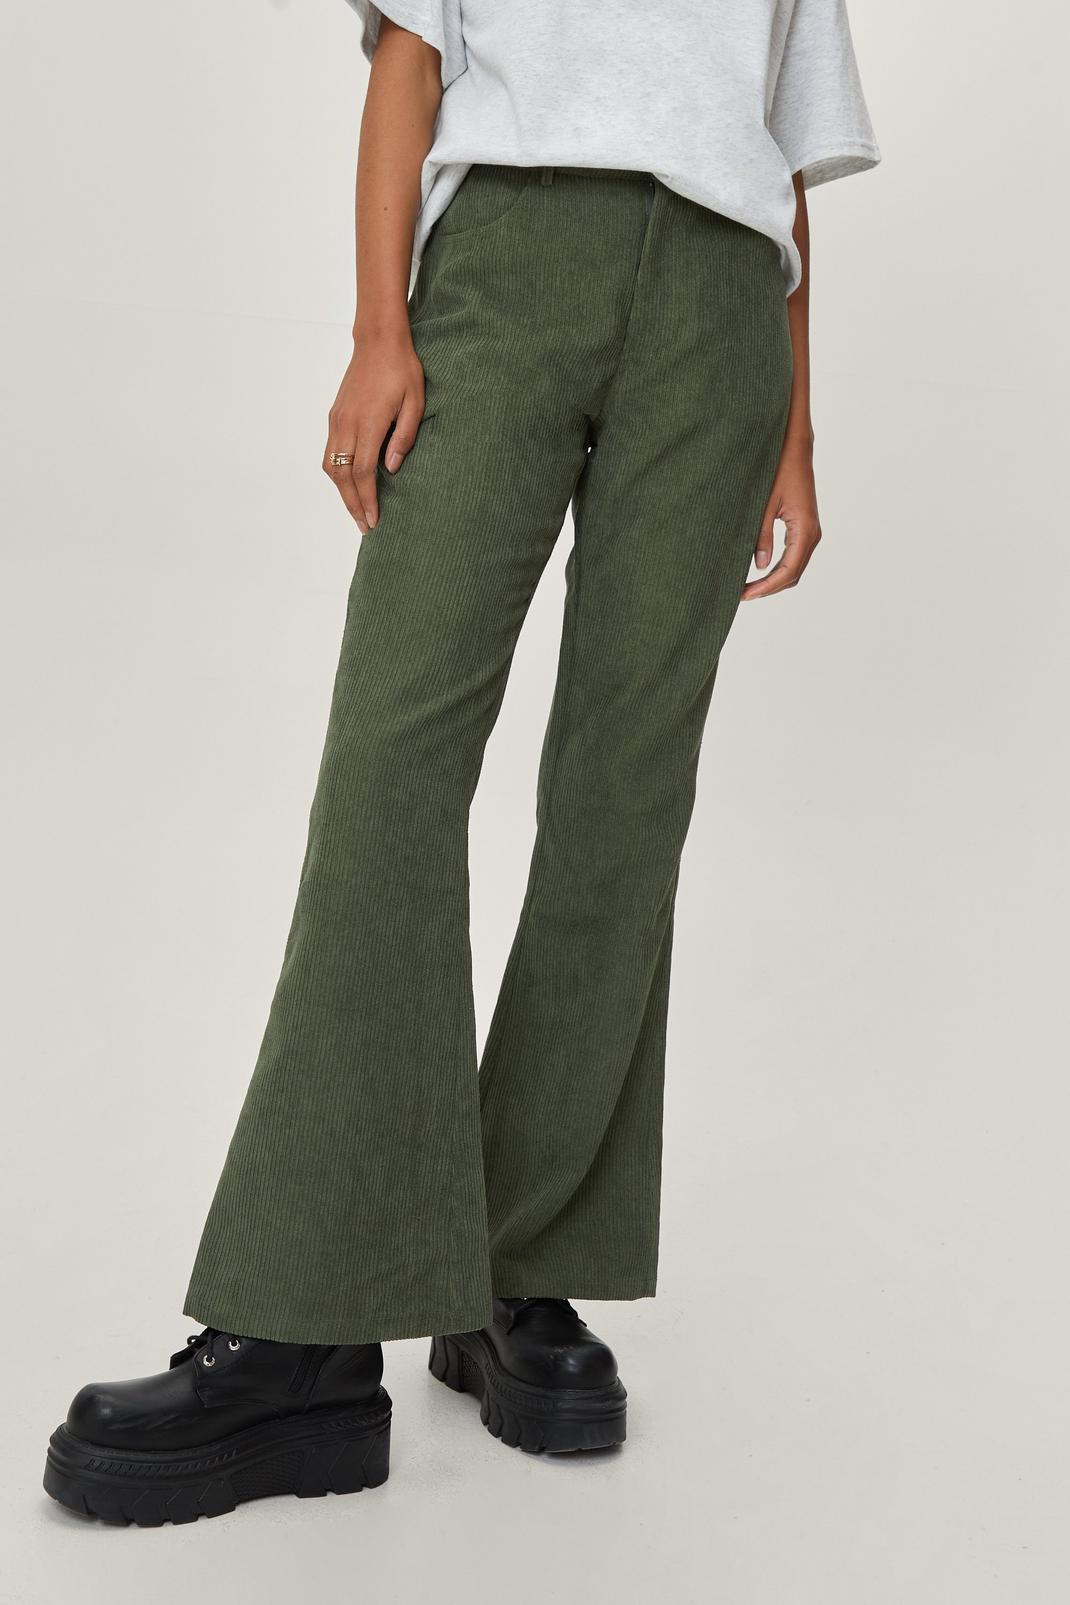 151 Petite Corduroy High Waisted Flared Pants image number 2